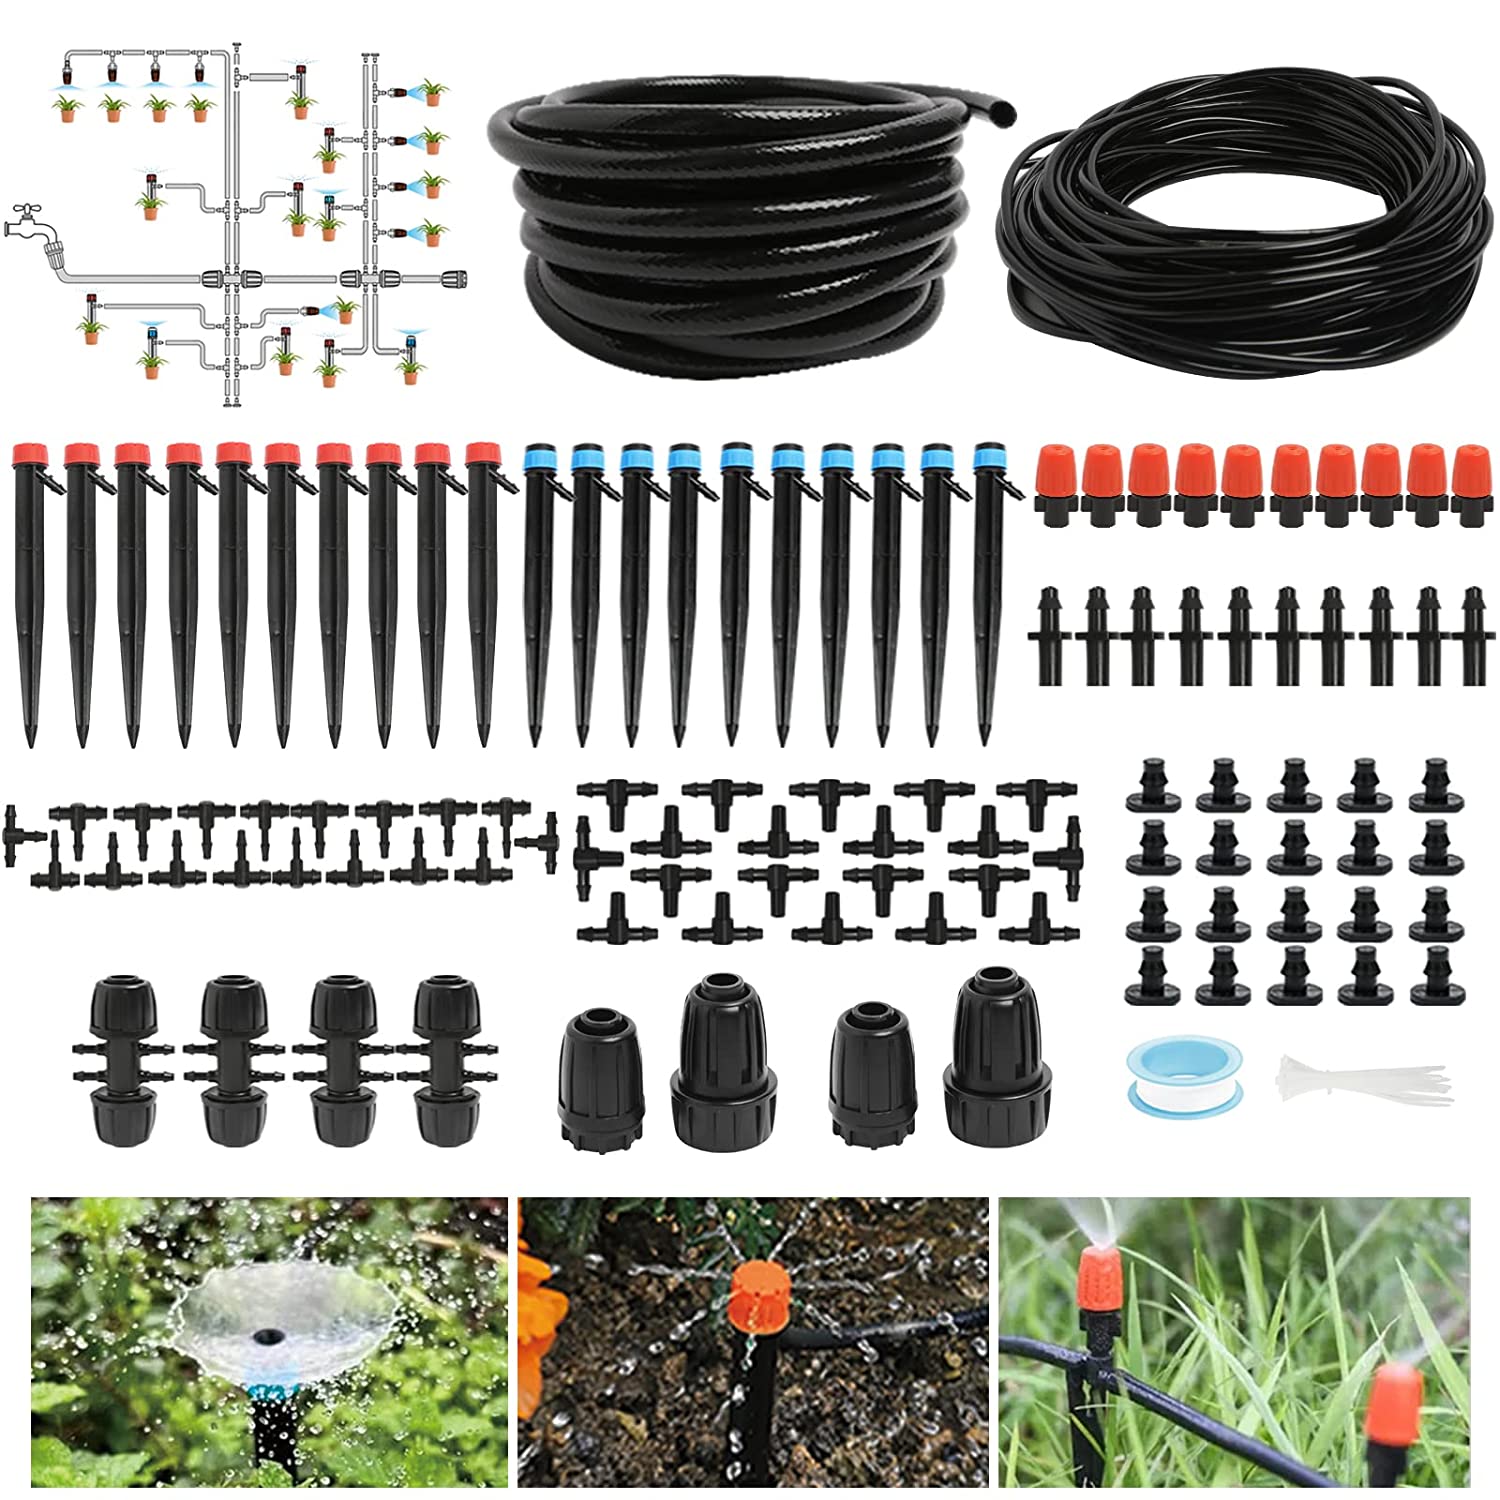 170FT Drip Irrigation System Kit, Automatic Garden [...]